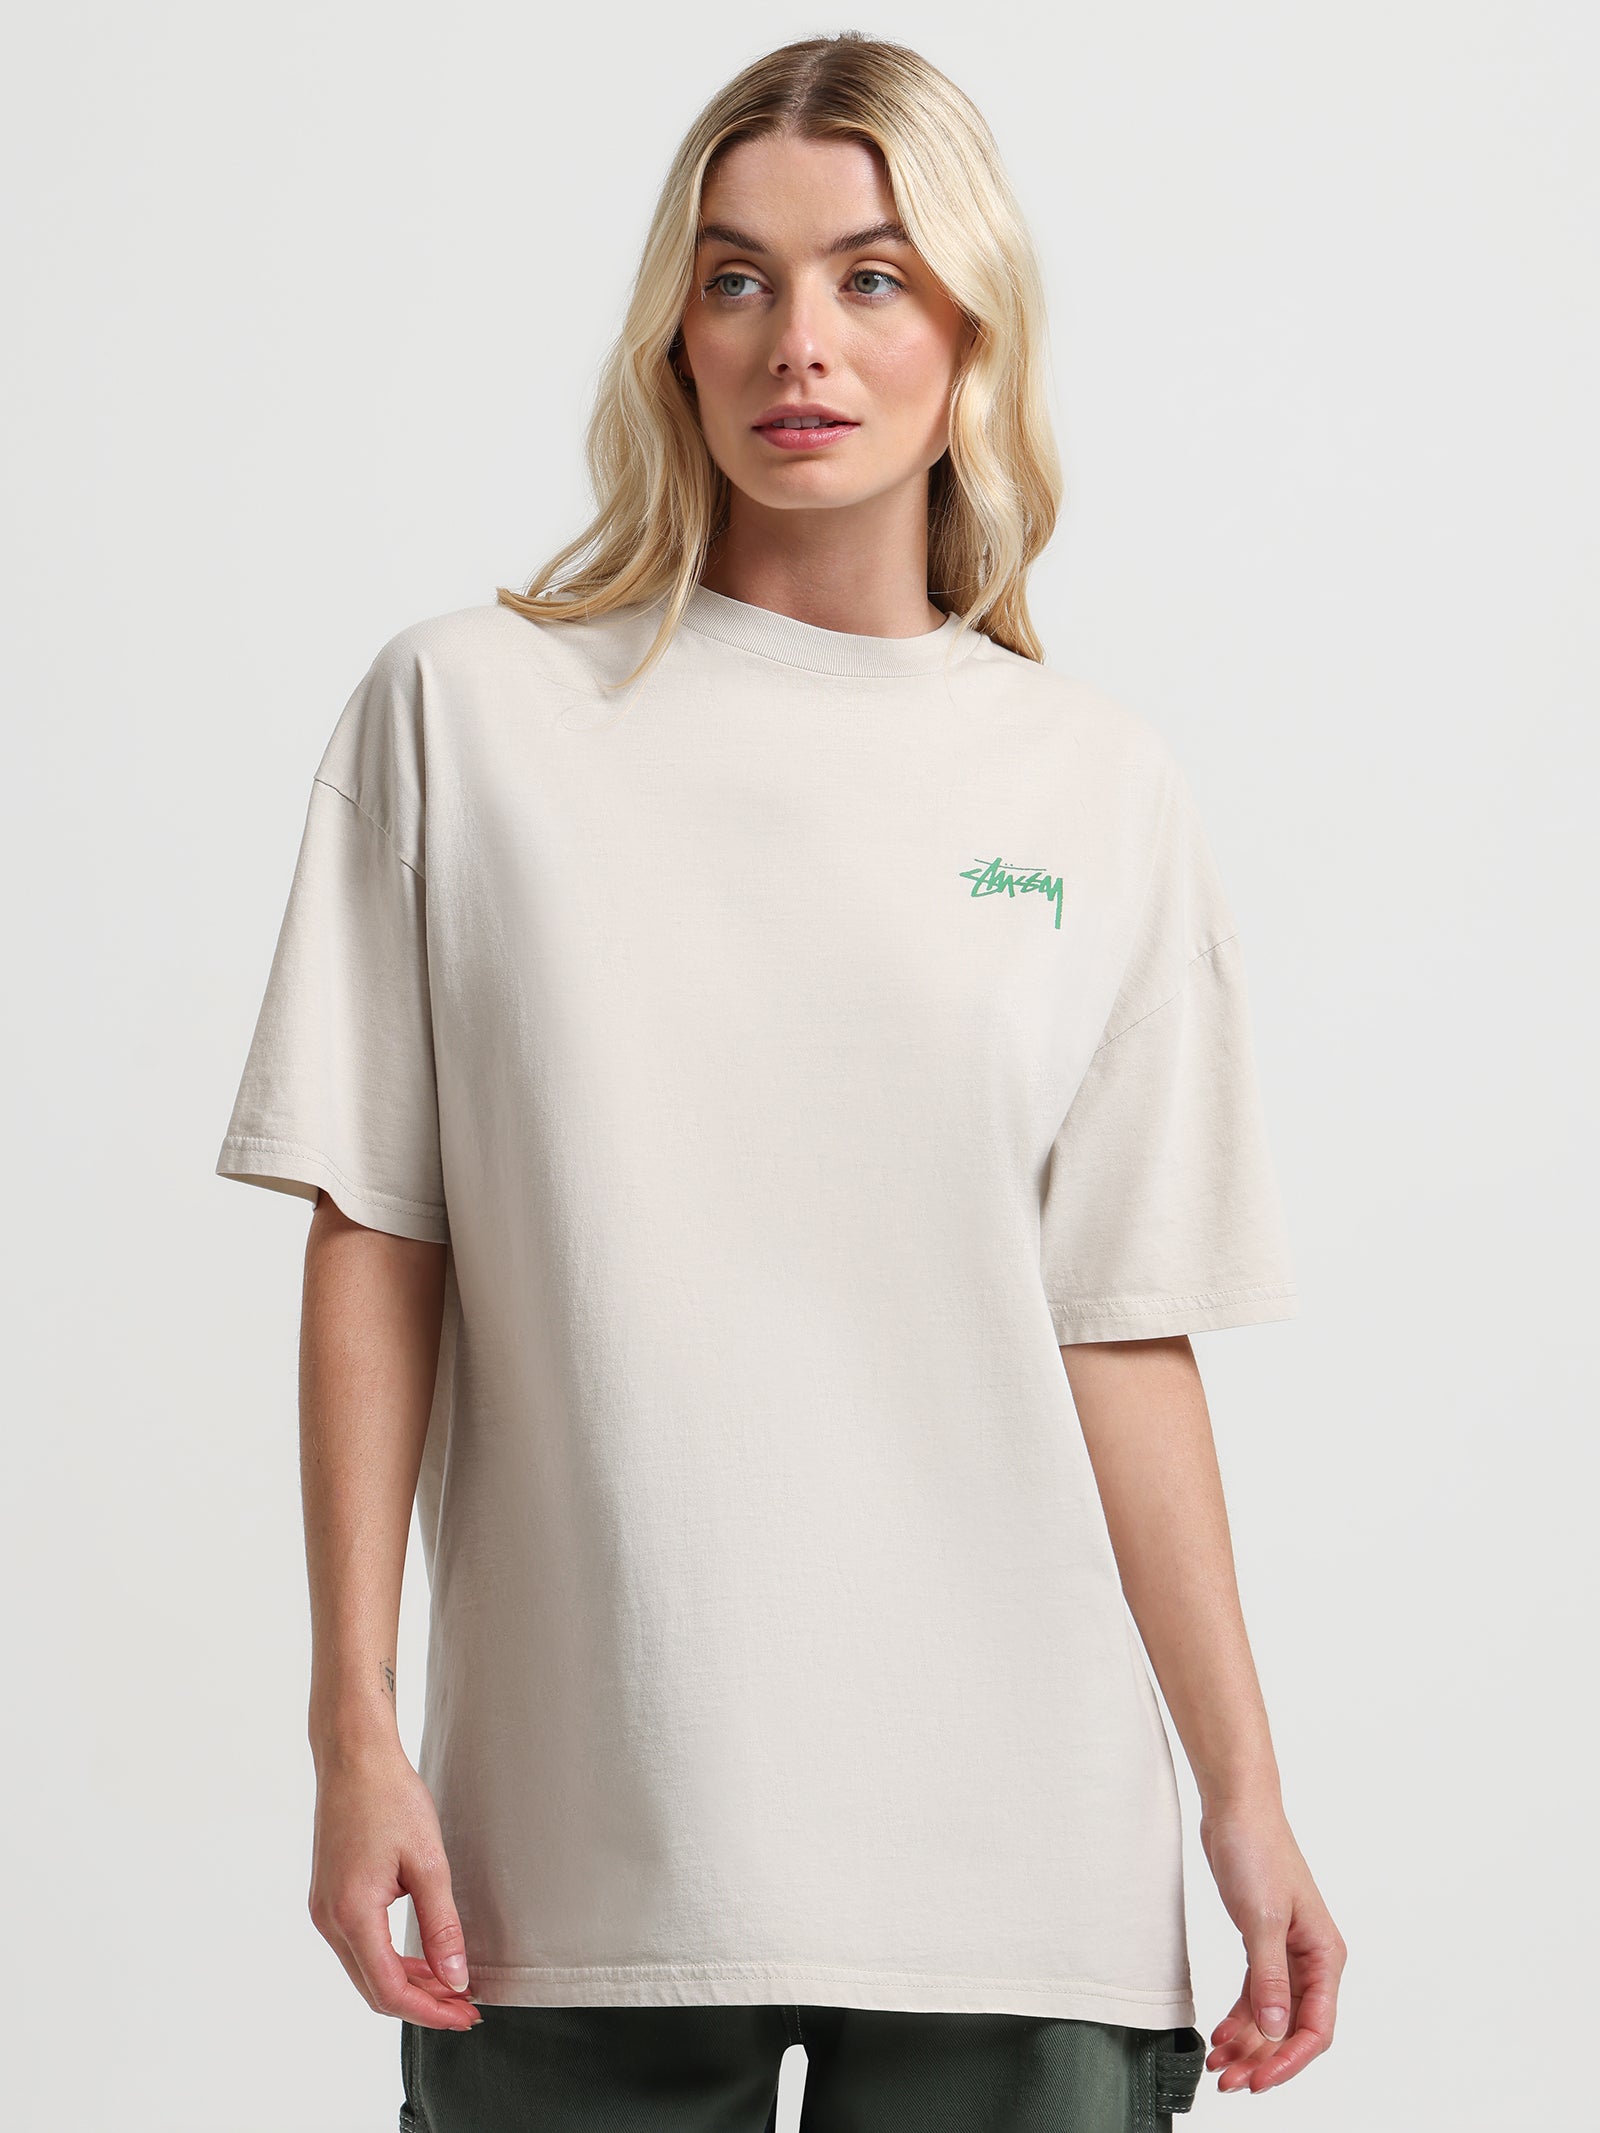 Elation Relaxed T-Shirt in White Sand - Glue Store